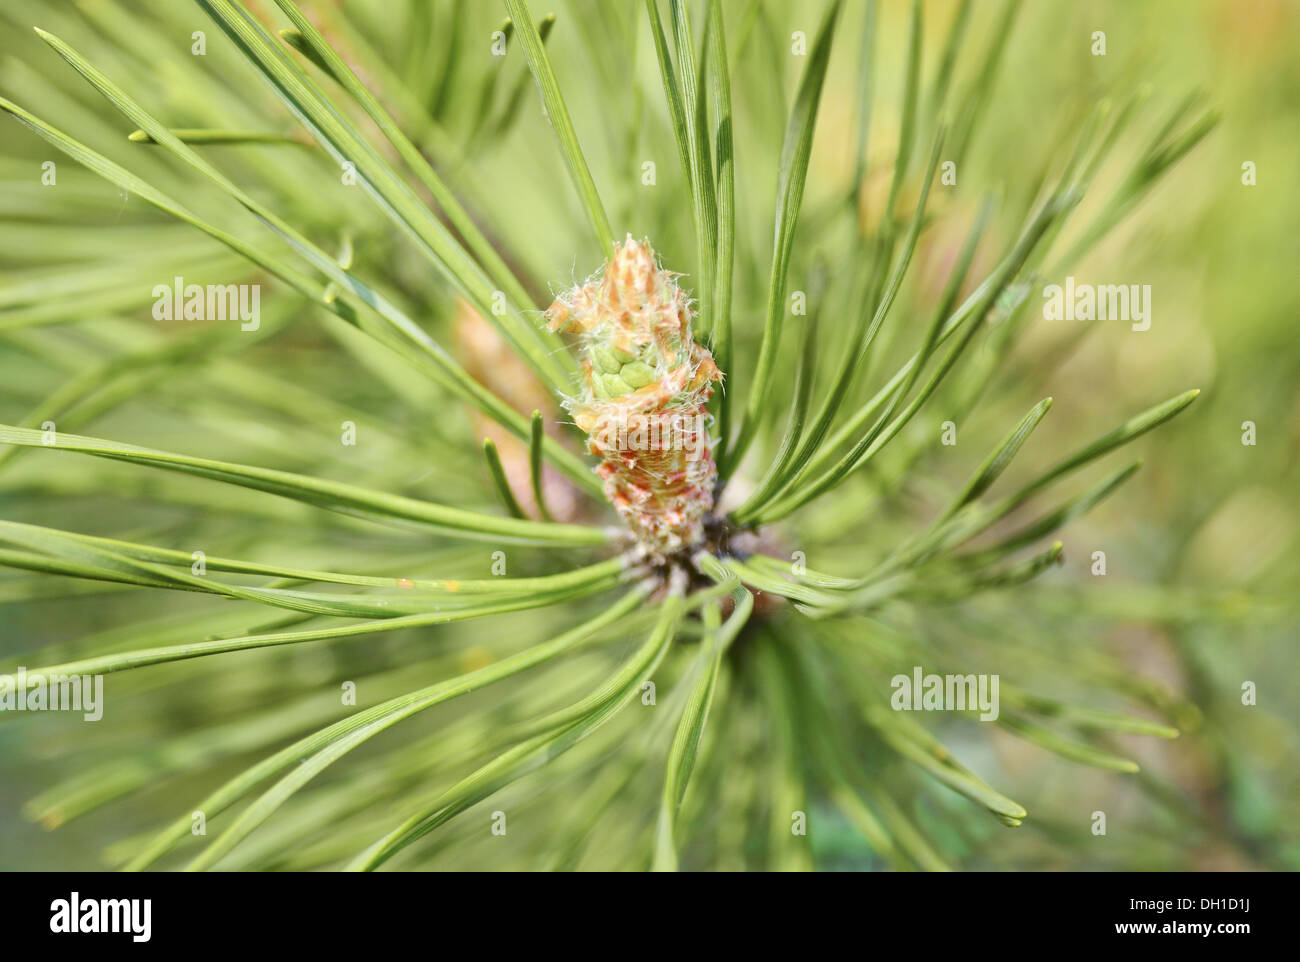 A conifer tree Stock Photo